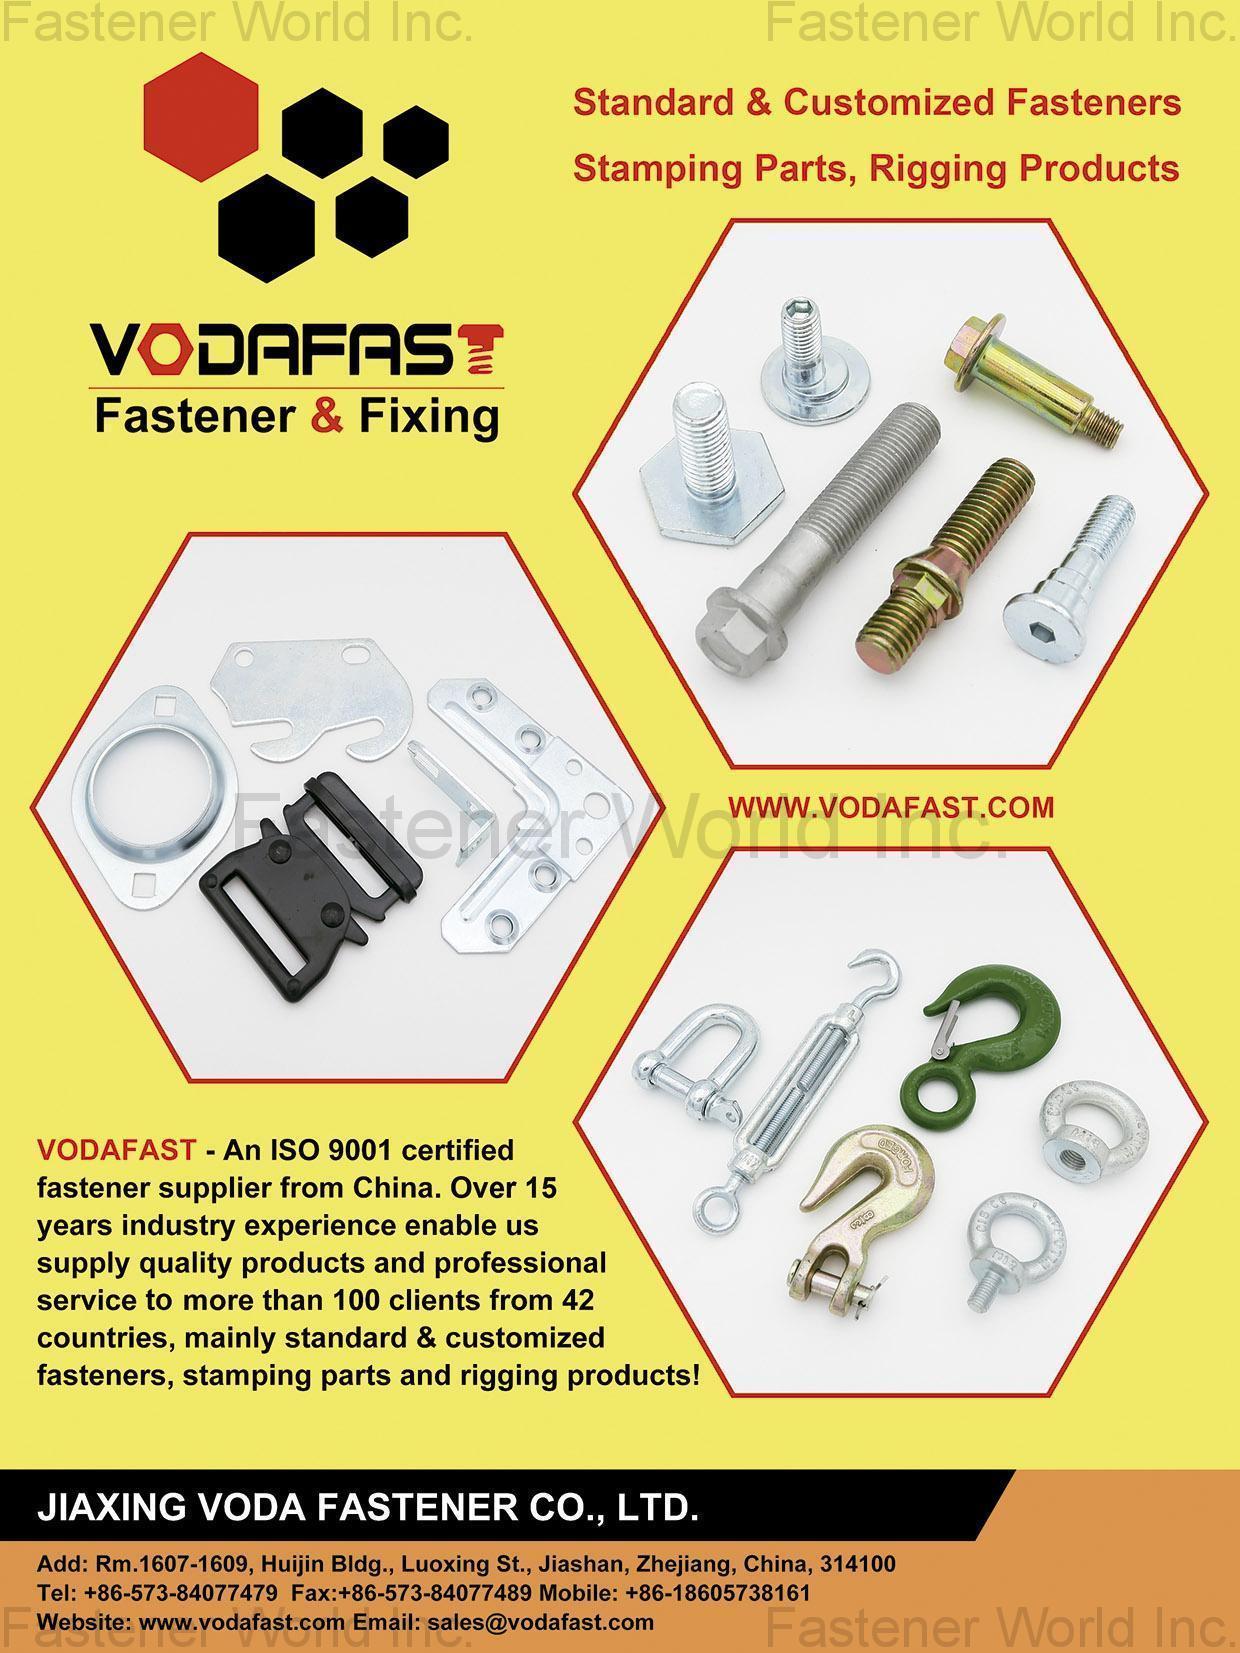 JIAXING VODA FASTENER CO., LTD. , Standard & Customized Fasteners, Stamping Parts, Rigging Products